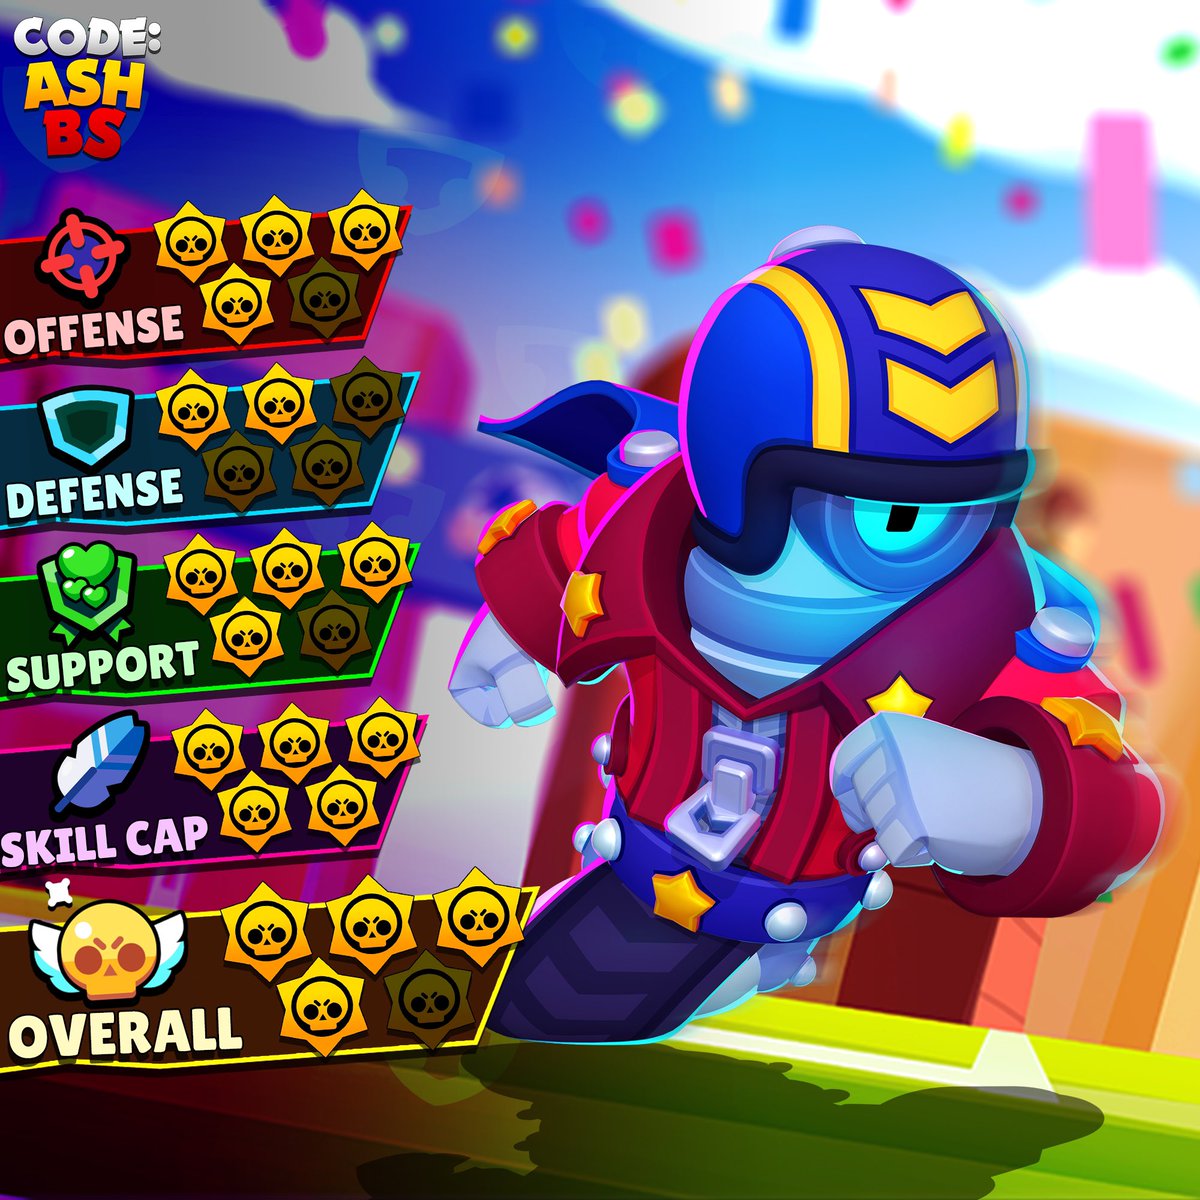 Code Ashbs On Twitter Stu S Power Ratings Great On Offense For Fast Aggressive Plays And Distraction Poor Defense Due To Low Dps But Can Stun Burn With Super Amazing Gadget For - brawl stars ratings